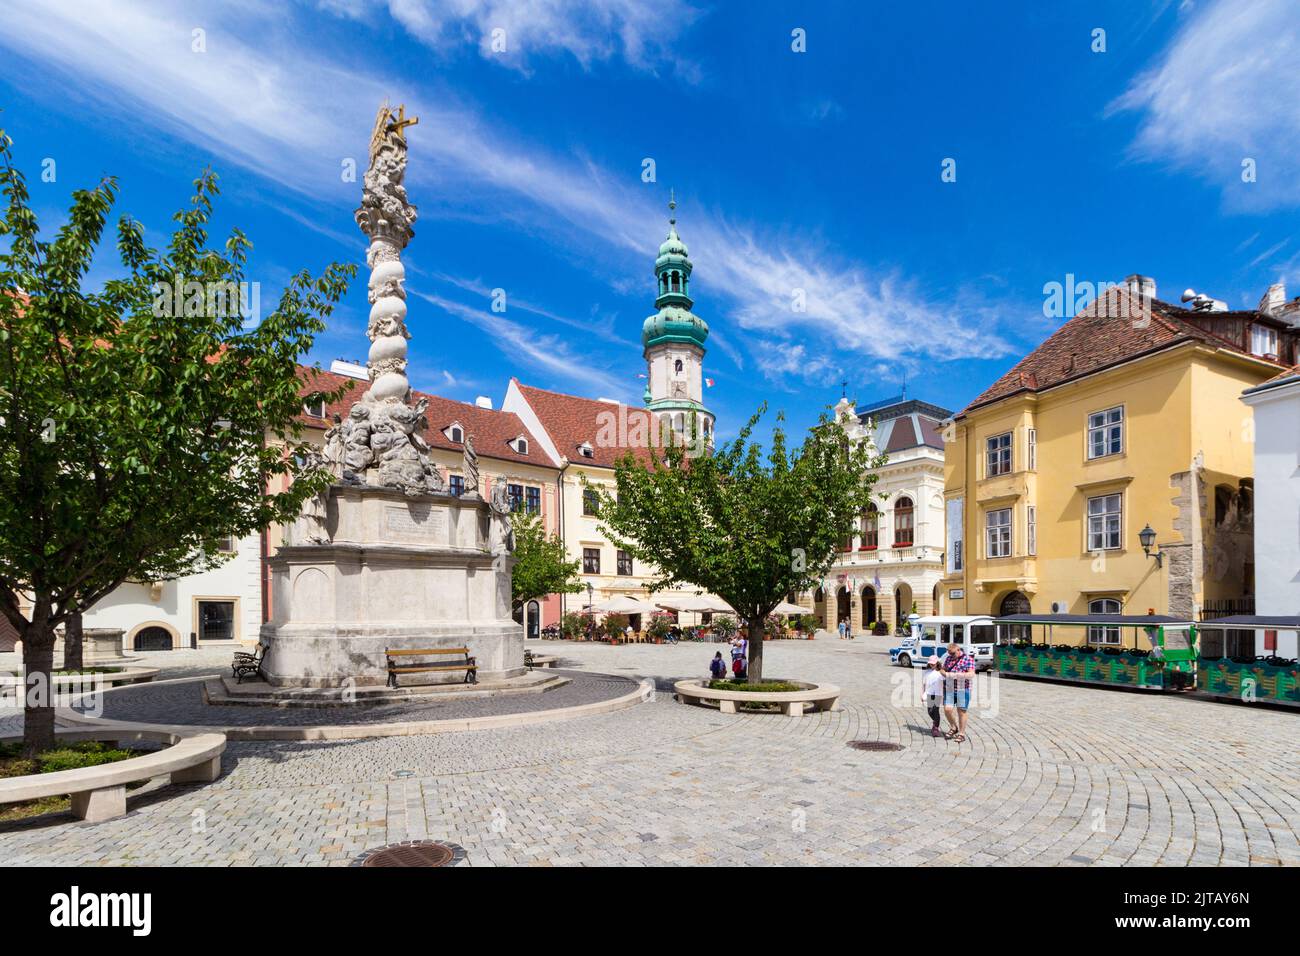 Fo ter (Main Square) with Holy Trinity Statue (1701), Firewatch Tower and tourist train, Sopron, Hungary Stock Photo